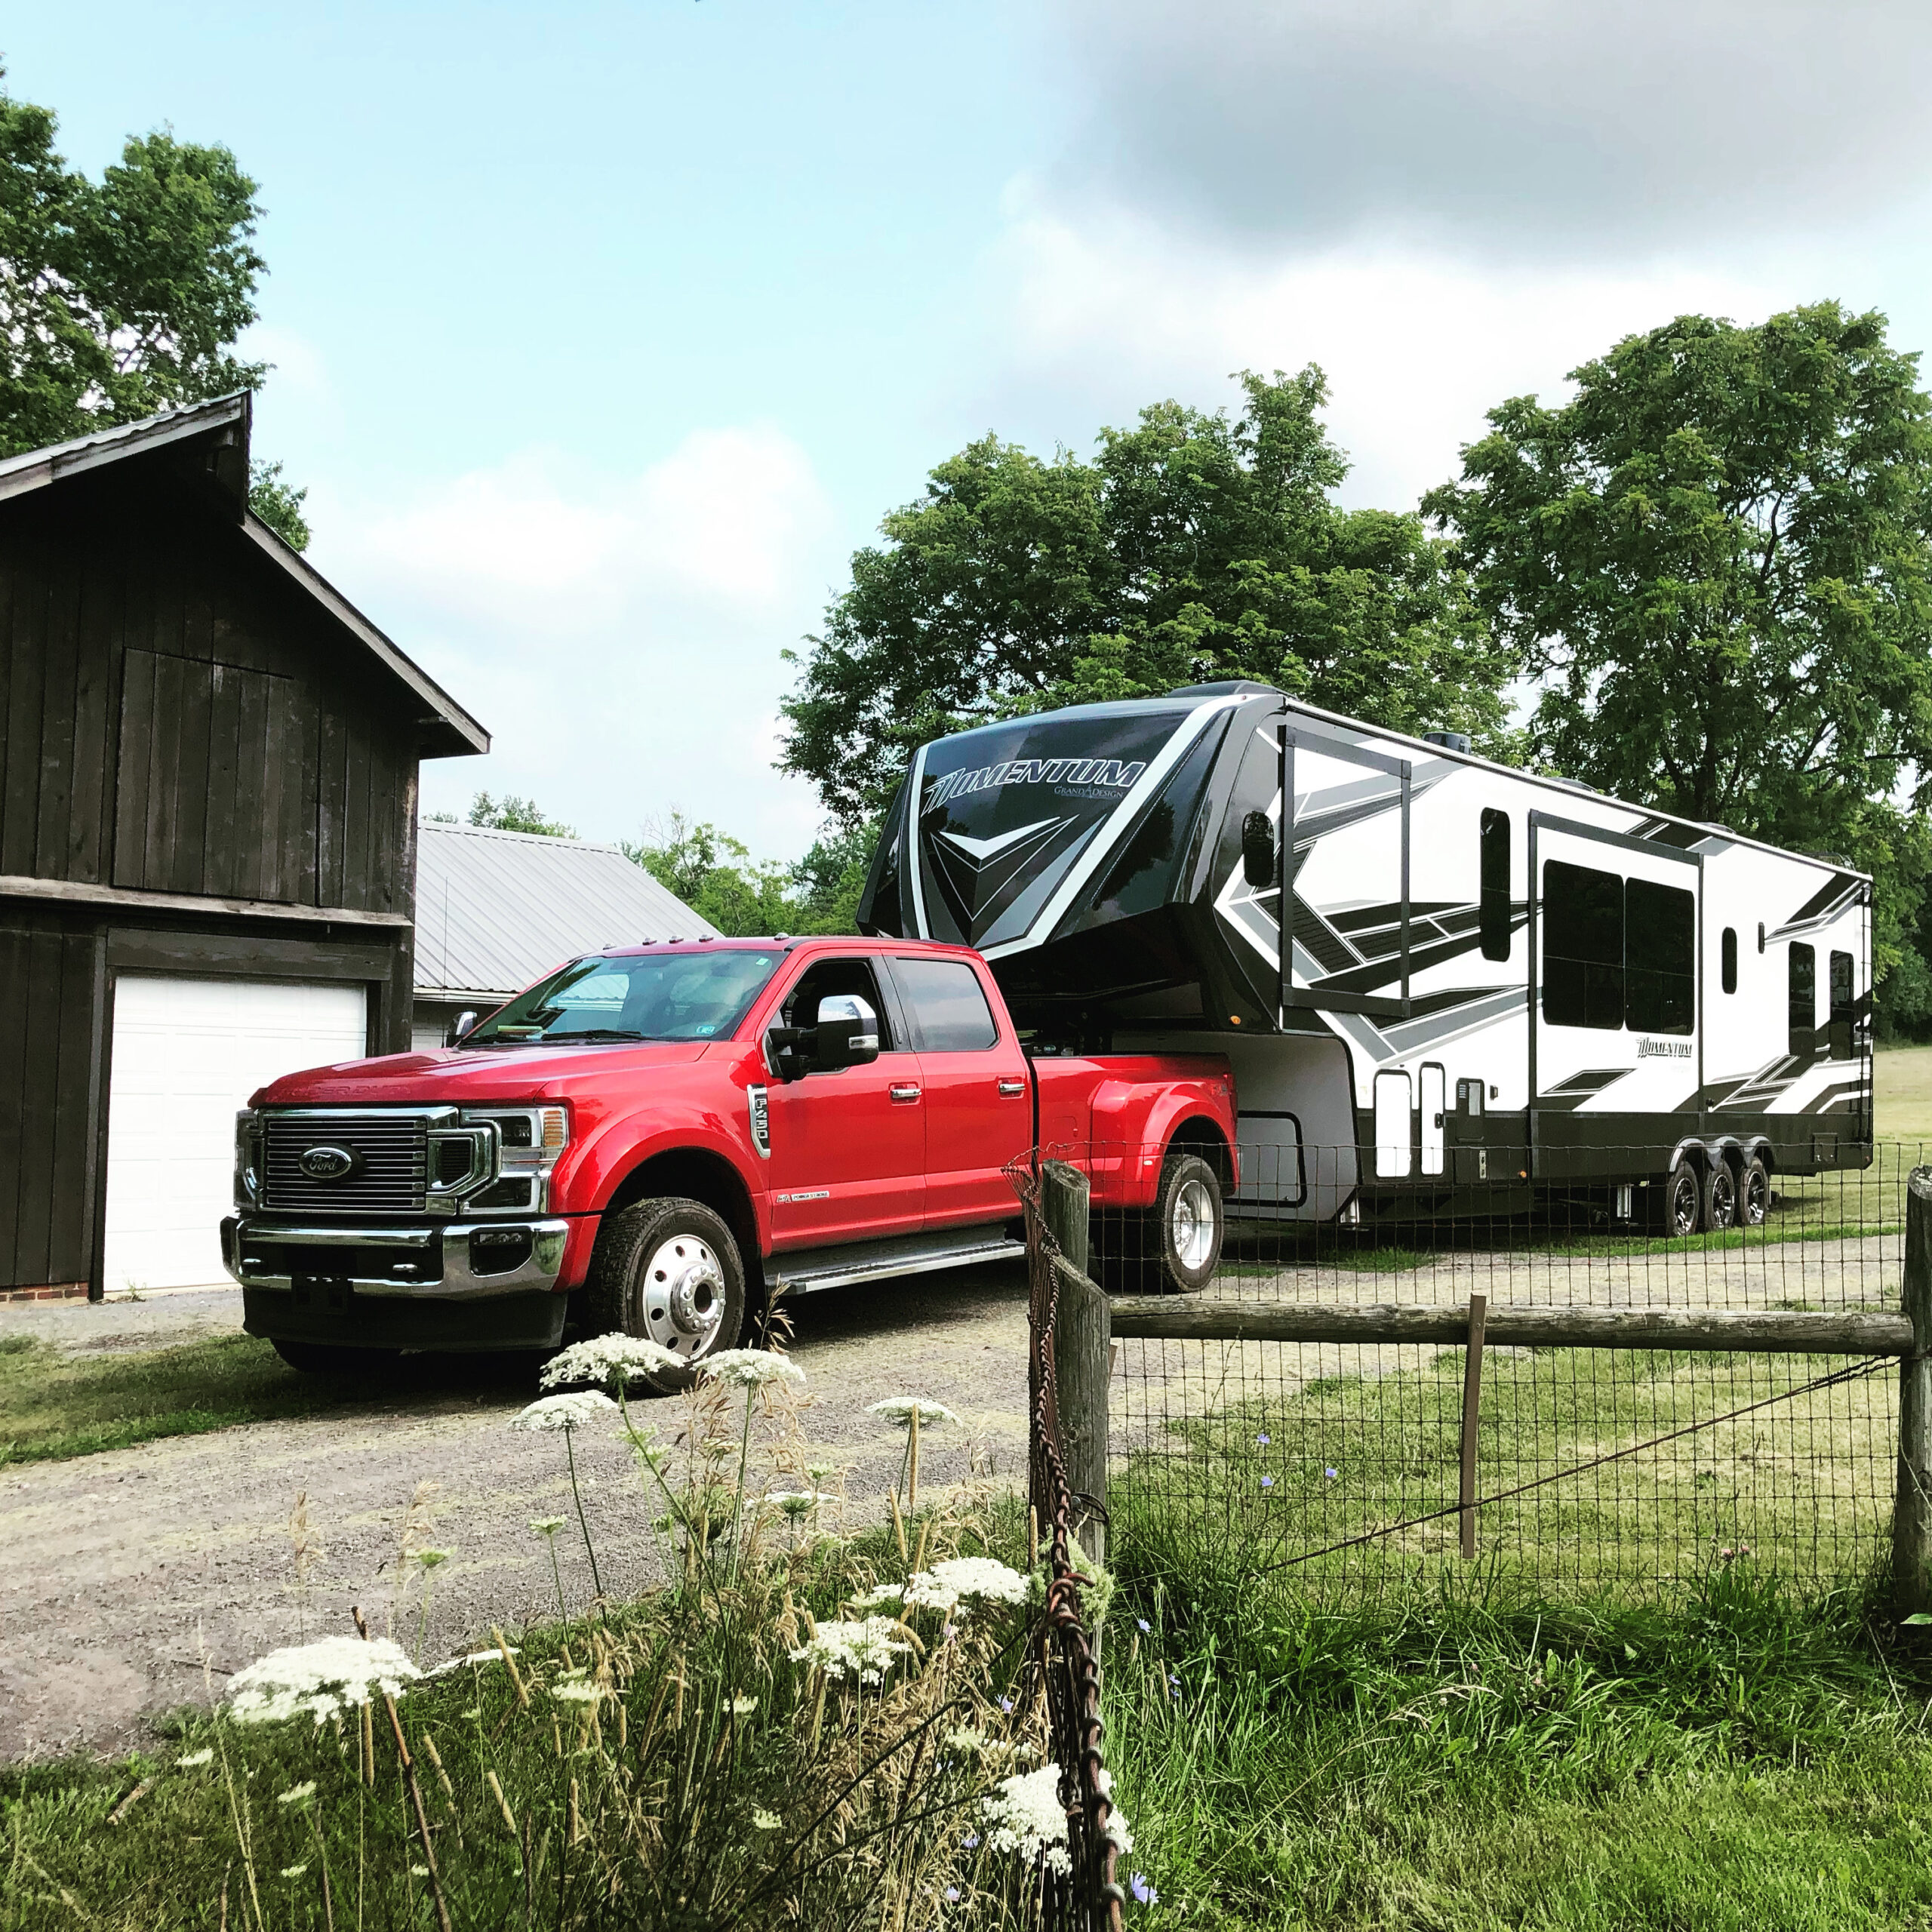 Hitching Made Easy: Connecting a Fifth Wheel RV to Your Truck